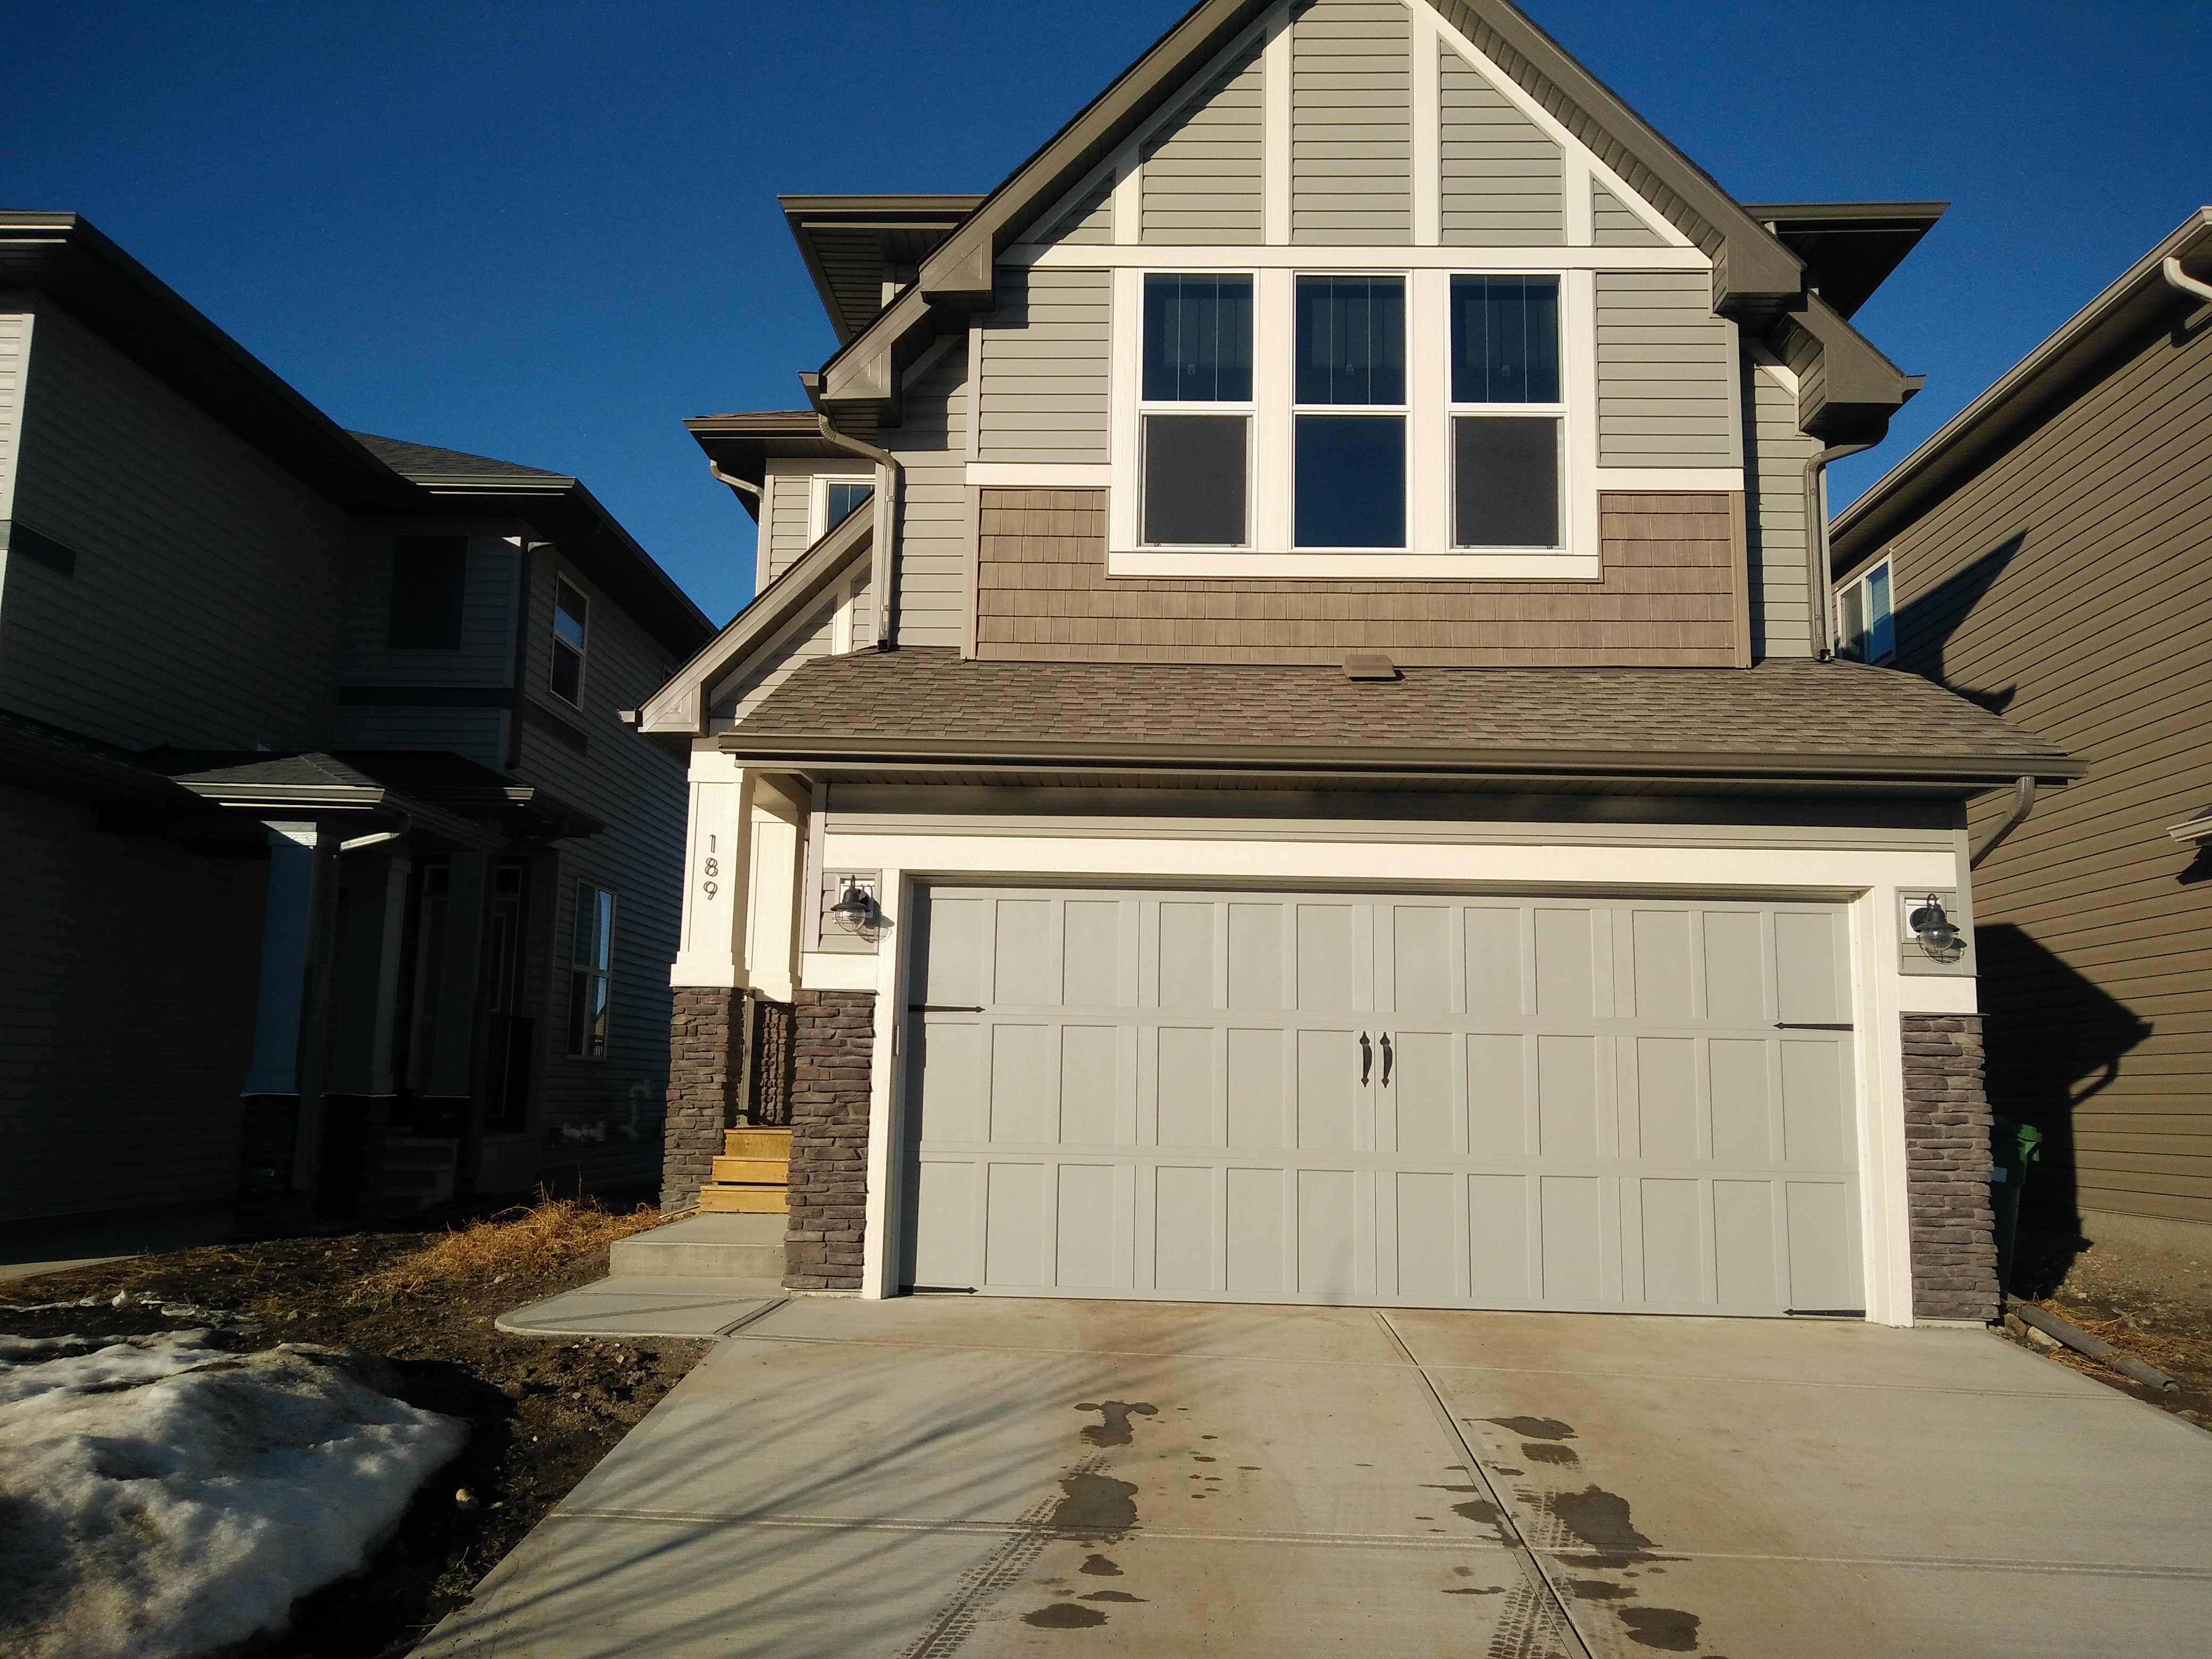 4 Bedroom 3.5 bath home with over 2200 Sq Ft of living space Airdrie!